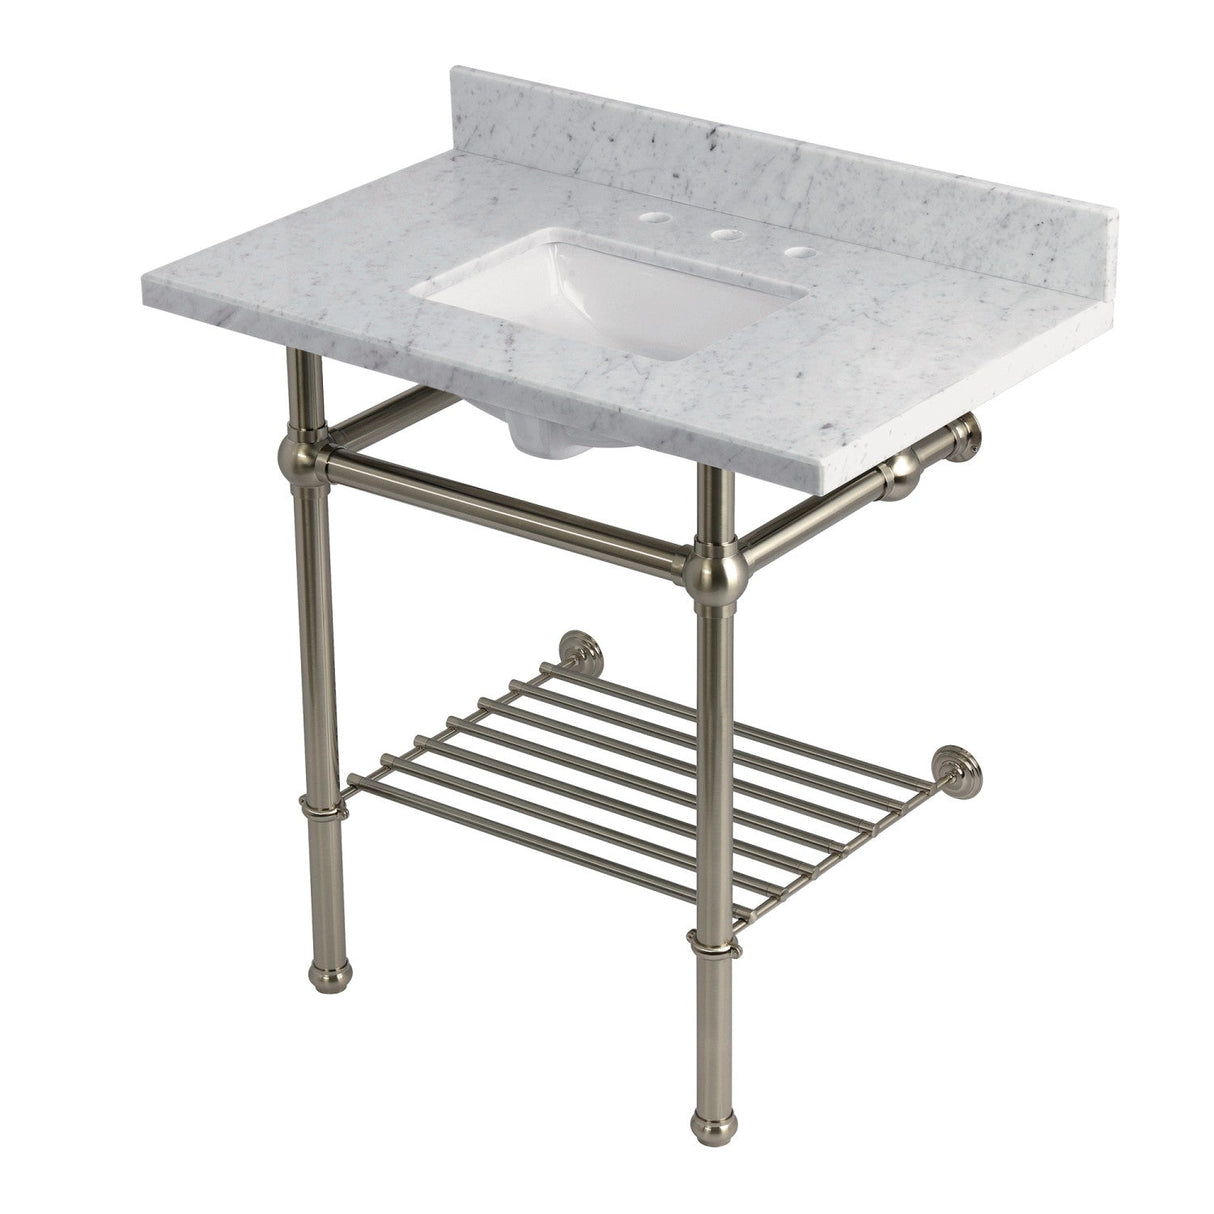 Templeton KVPB36MBSQB8 36-Inch Console Sink with Brass Legs (8-Inch, 3 Hole), Carrara Marble/Brushed Nickel